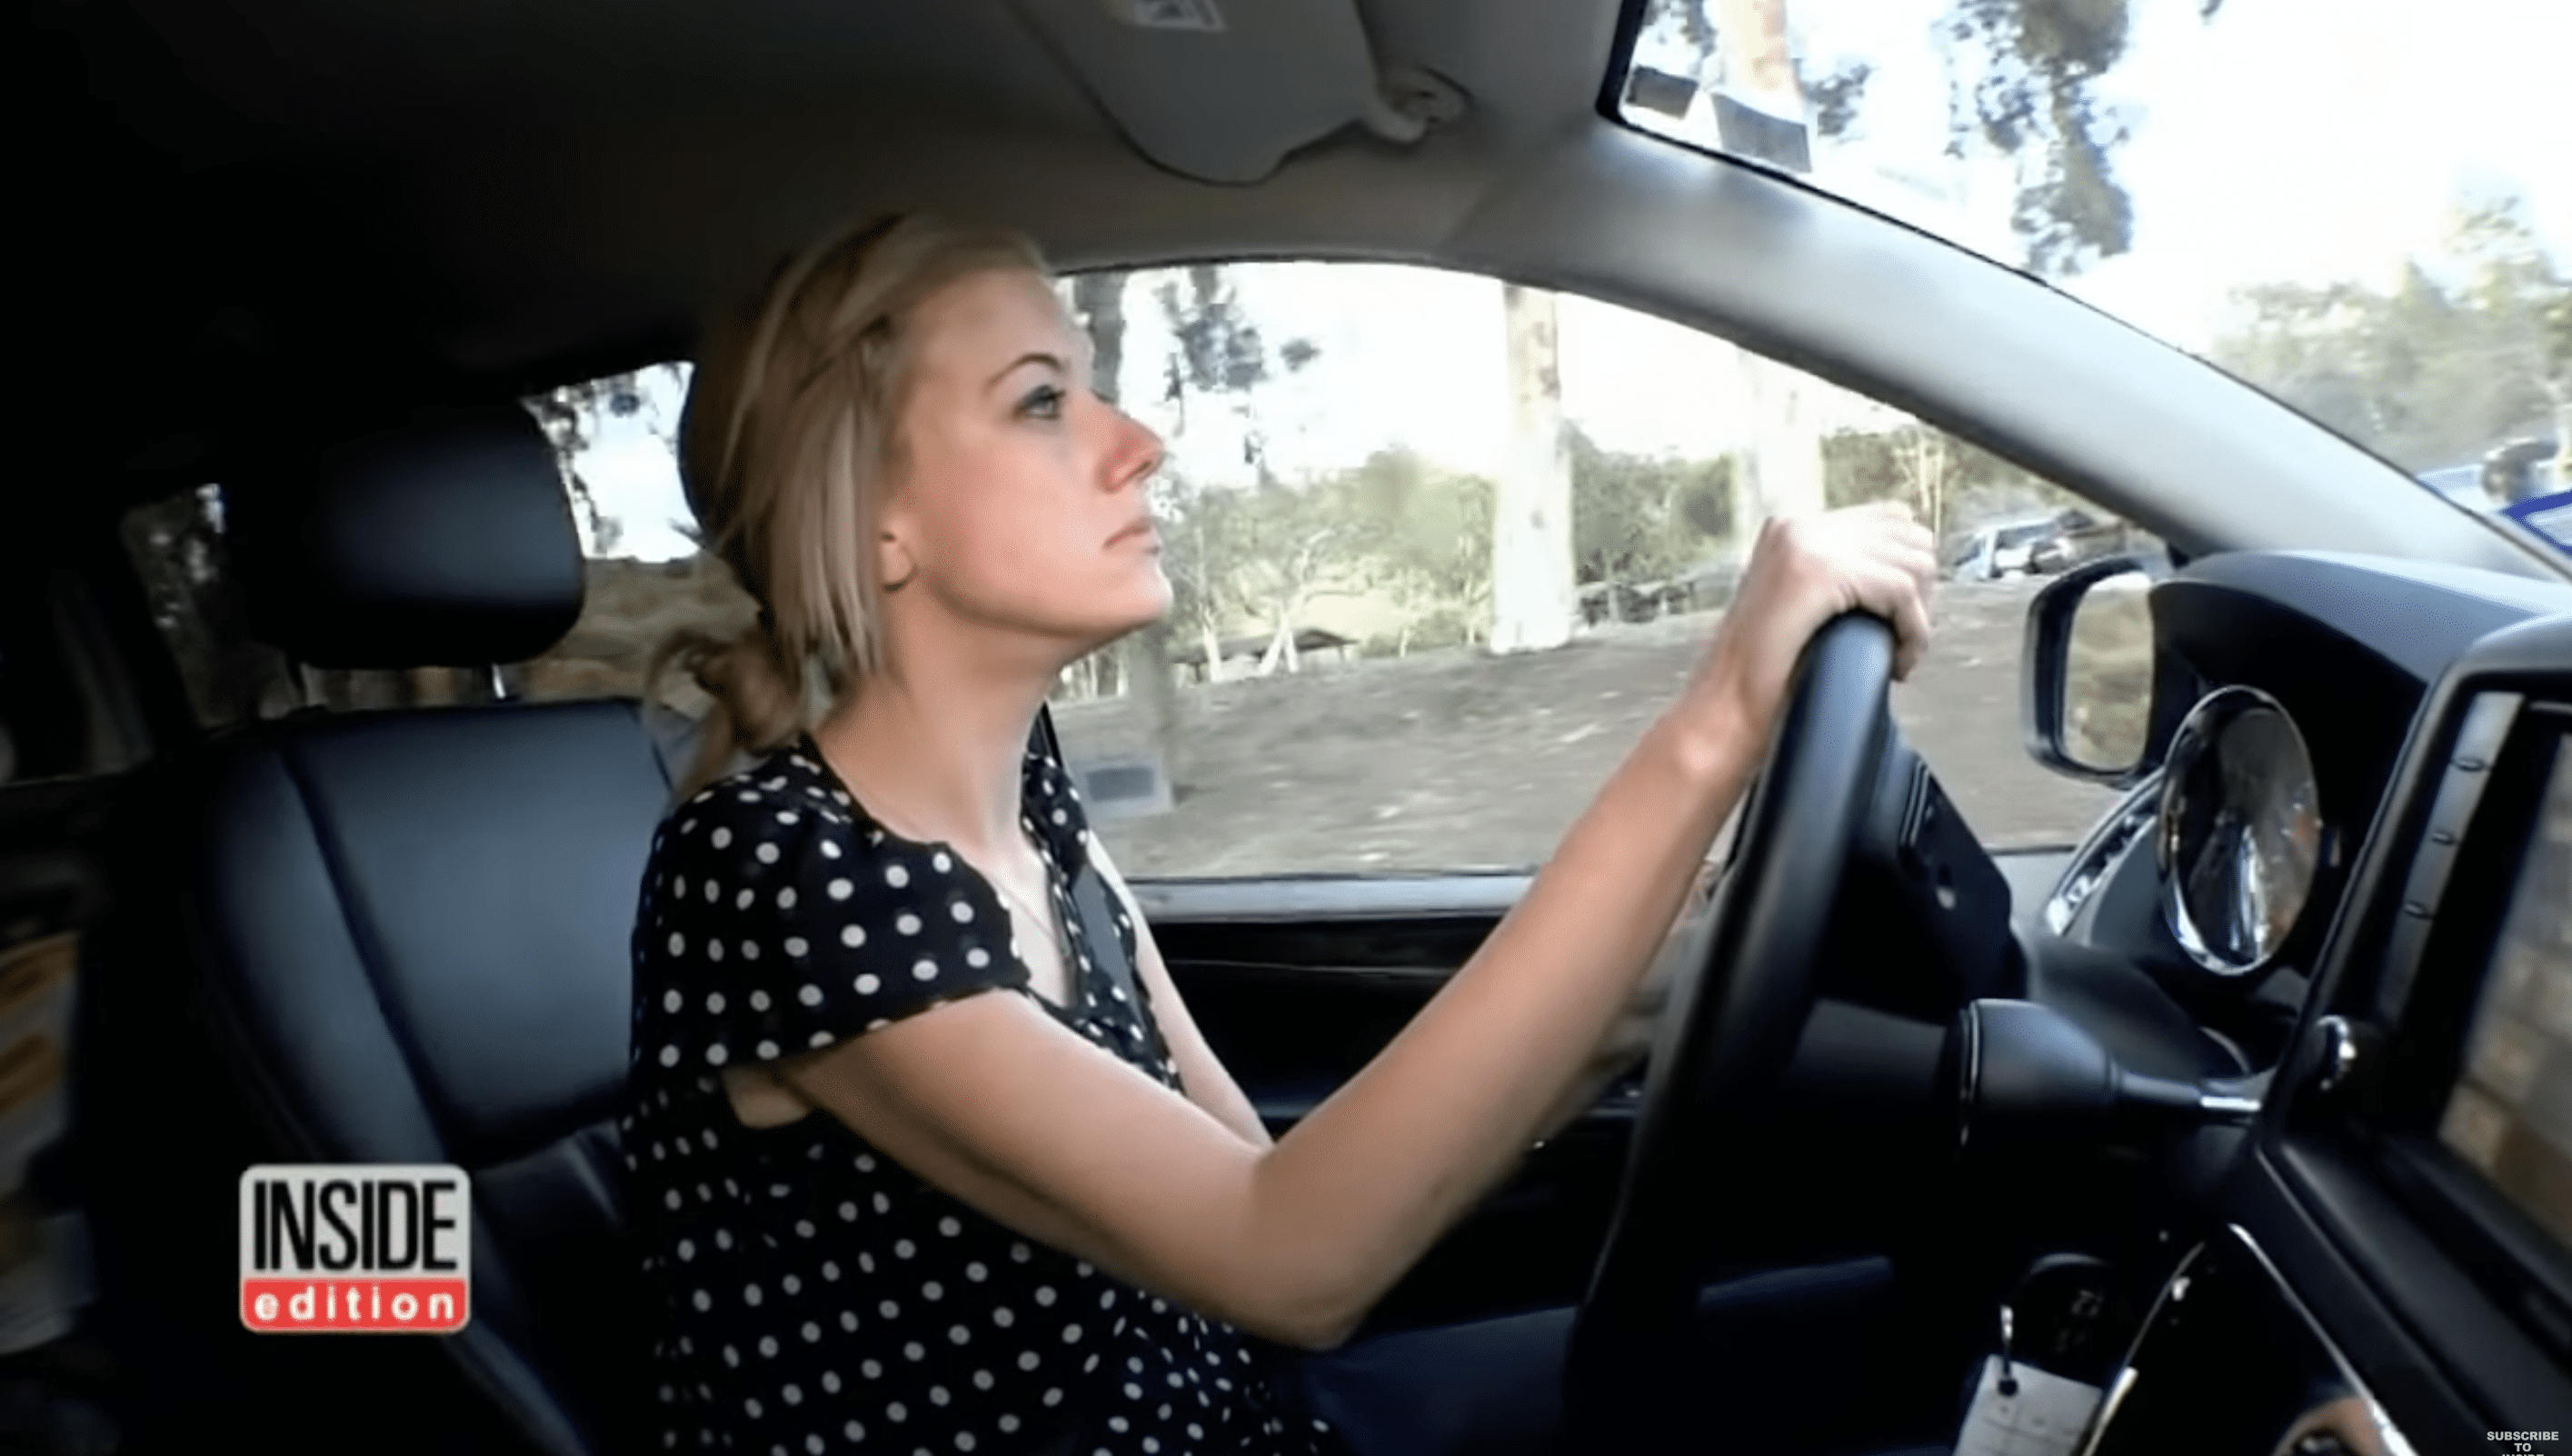 Angela driving the SUV shortly before it went down the embankment. | Photo: YouTube.com/Inside Edition